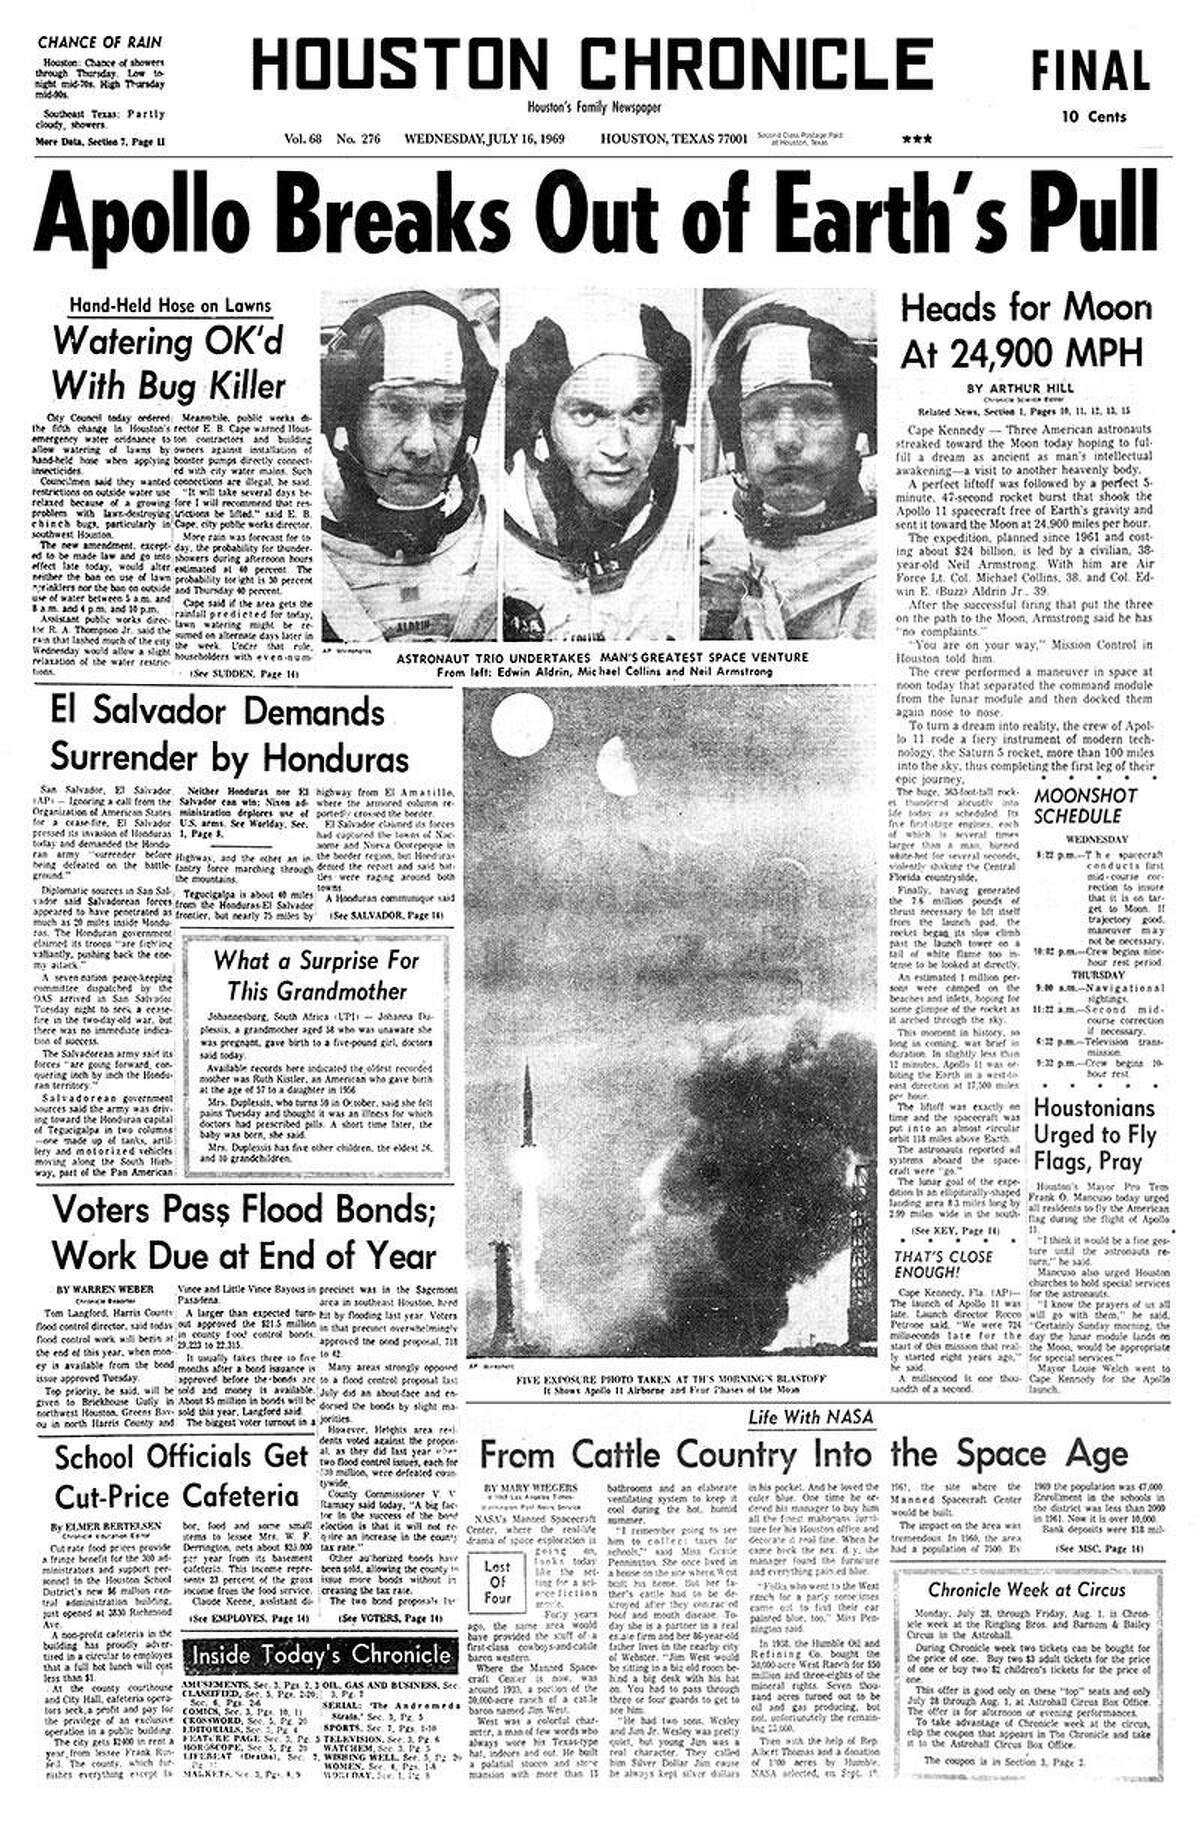 “Apollo Breaks Out of Earth’s Pull”. As it appeared in the Houston Chronicle: Vol. 276 No. 334 Houston, Texas - The Nation’s Sixth City - Wednesday, July 16, 1969.